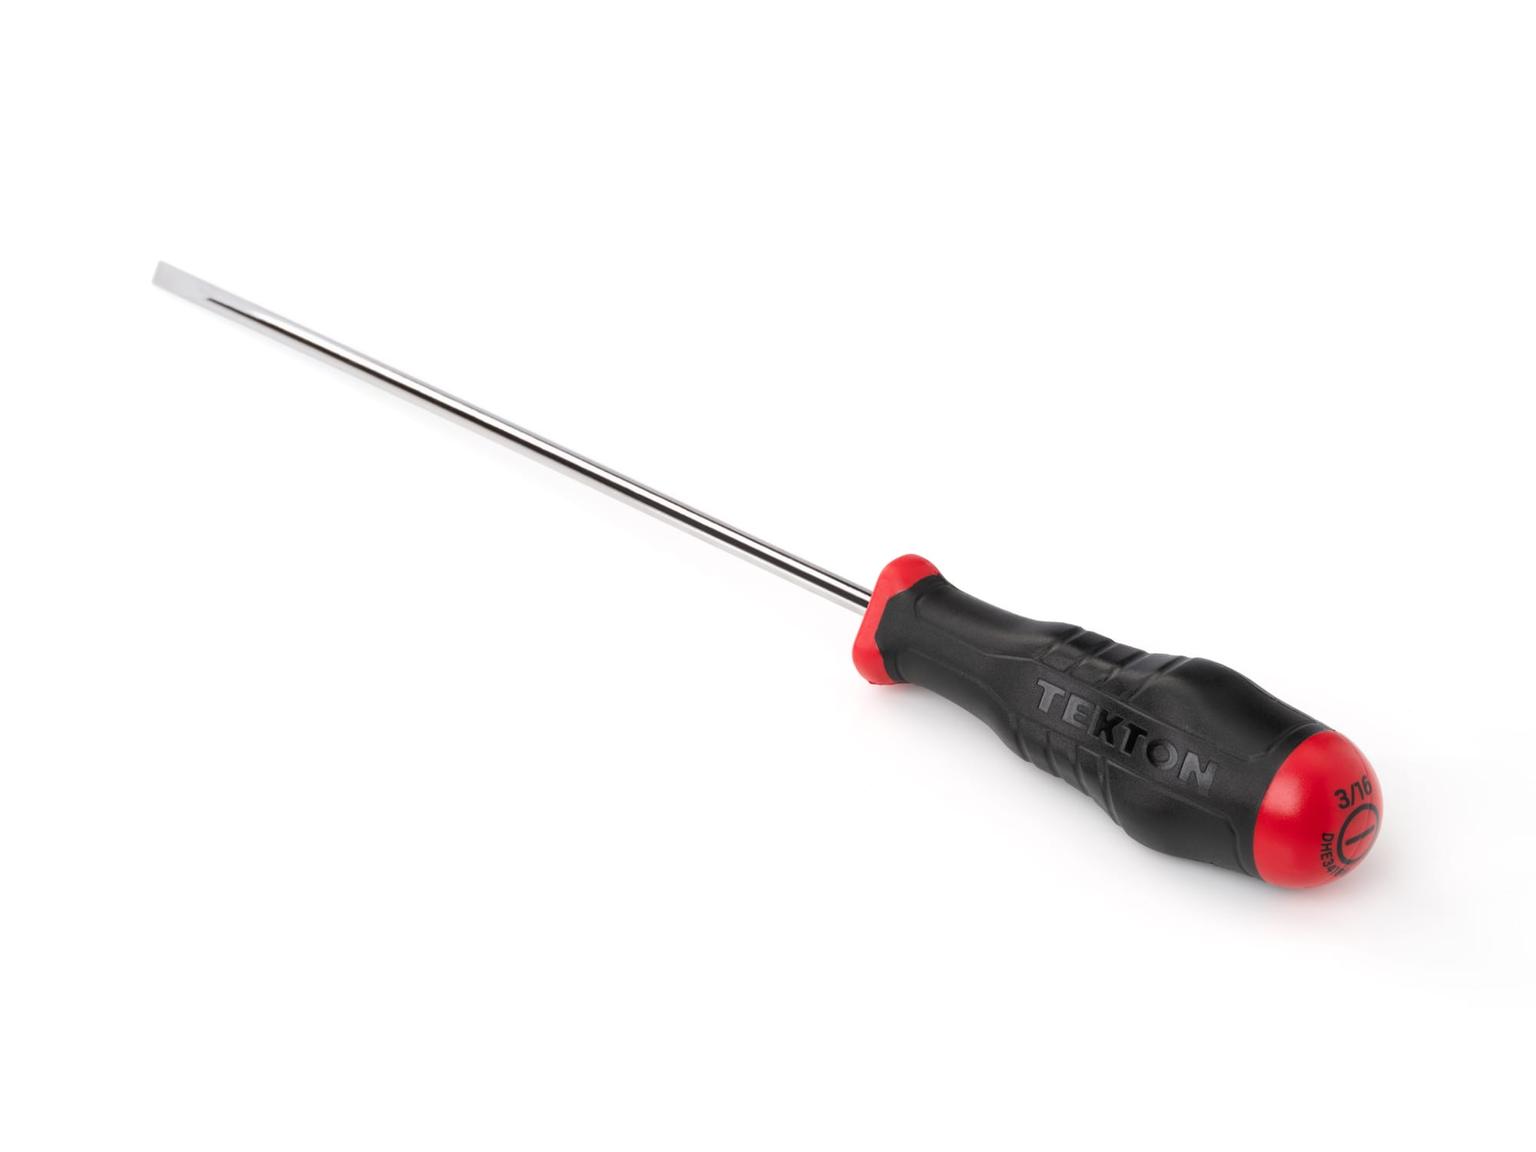 TEKTON DHE34188-T Long 3/16 Inch Slotted High-Torque Screwdriver